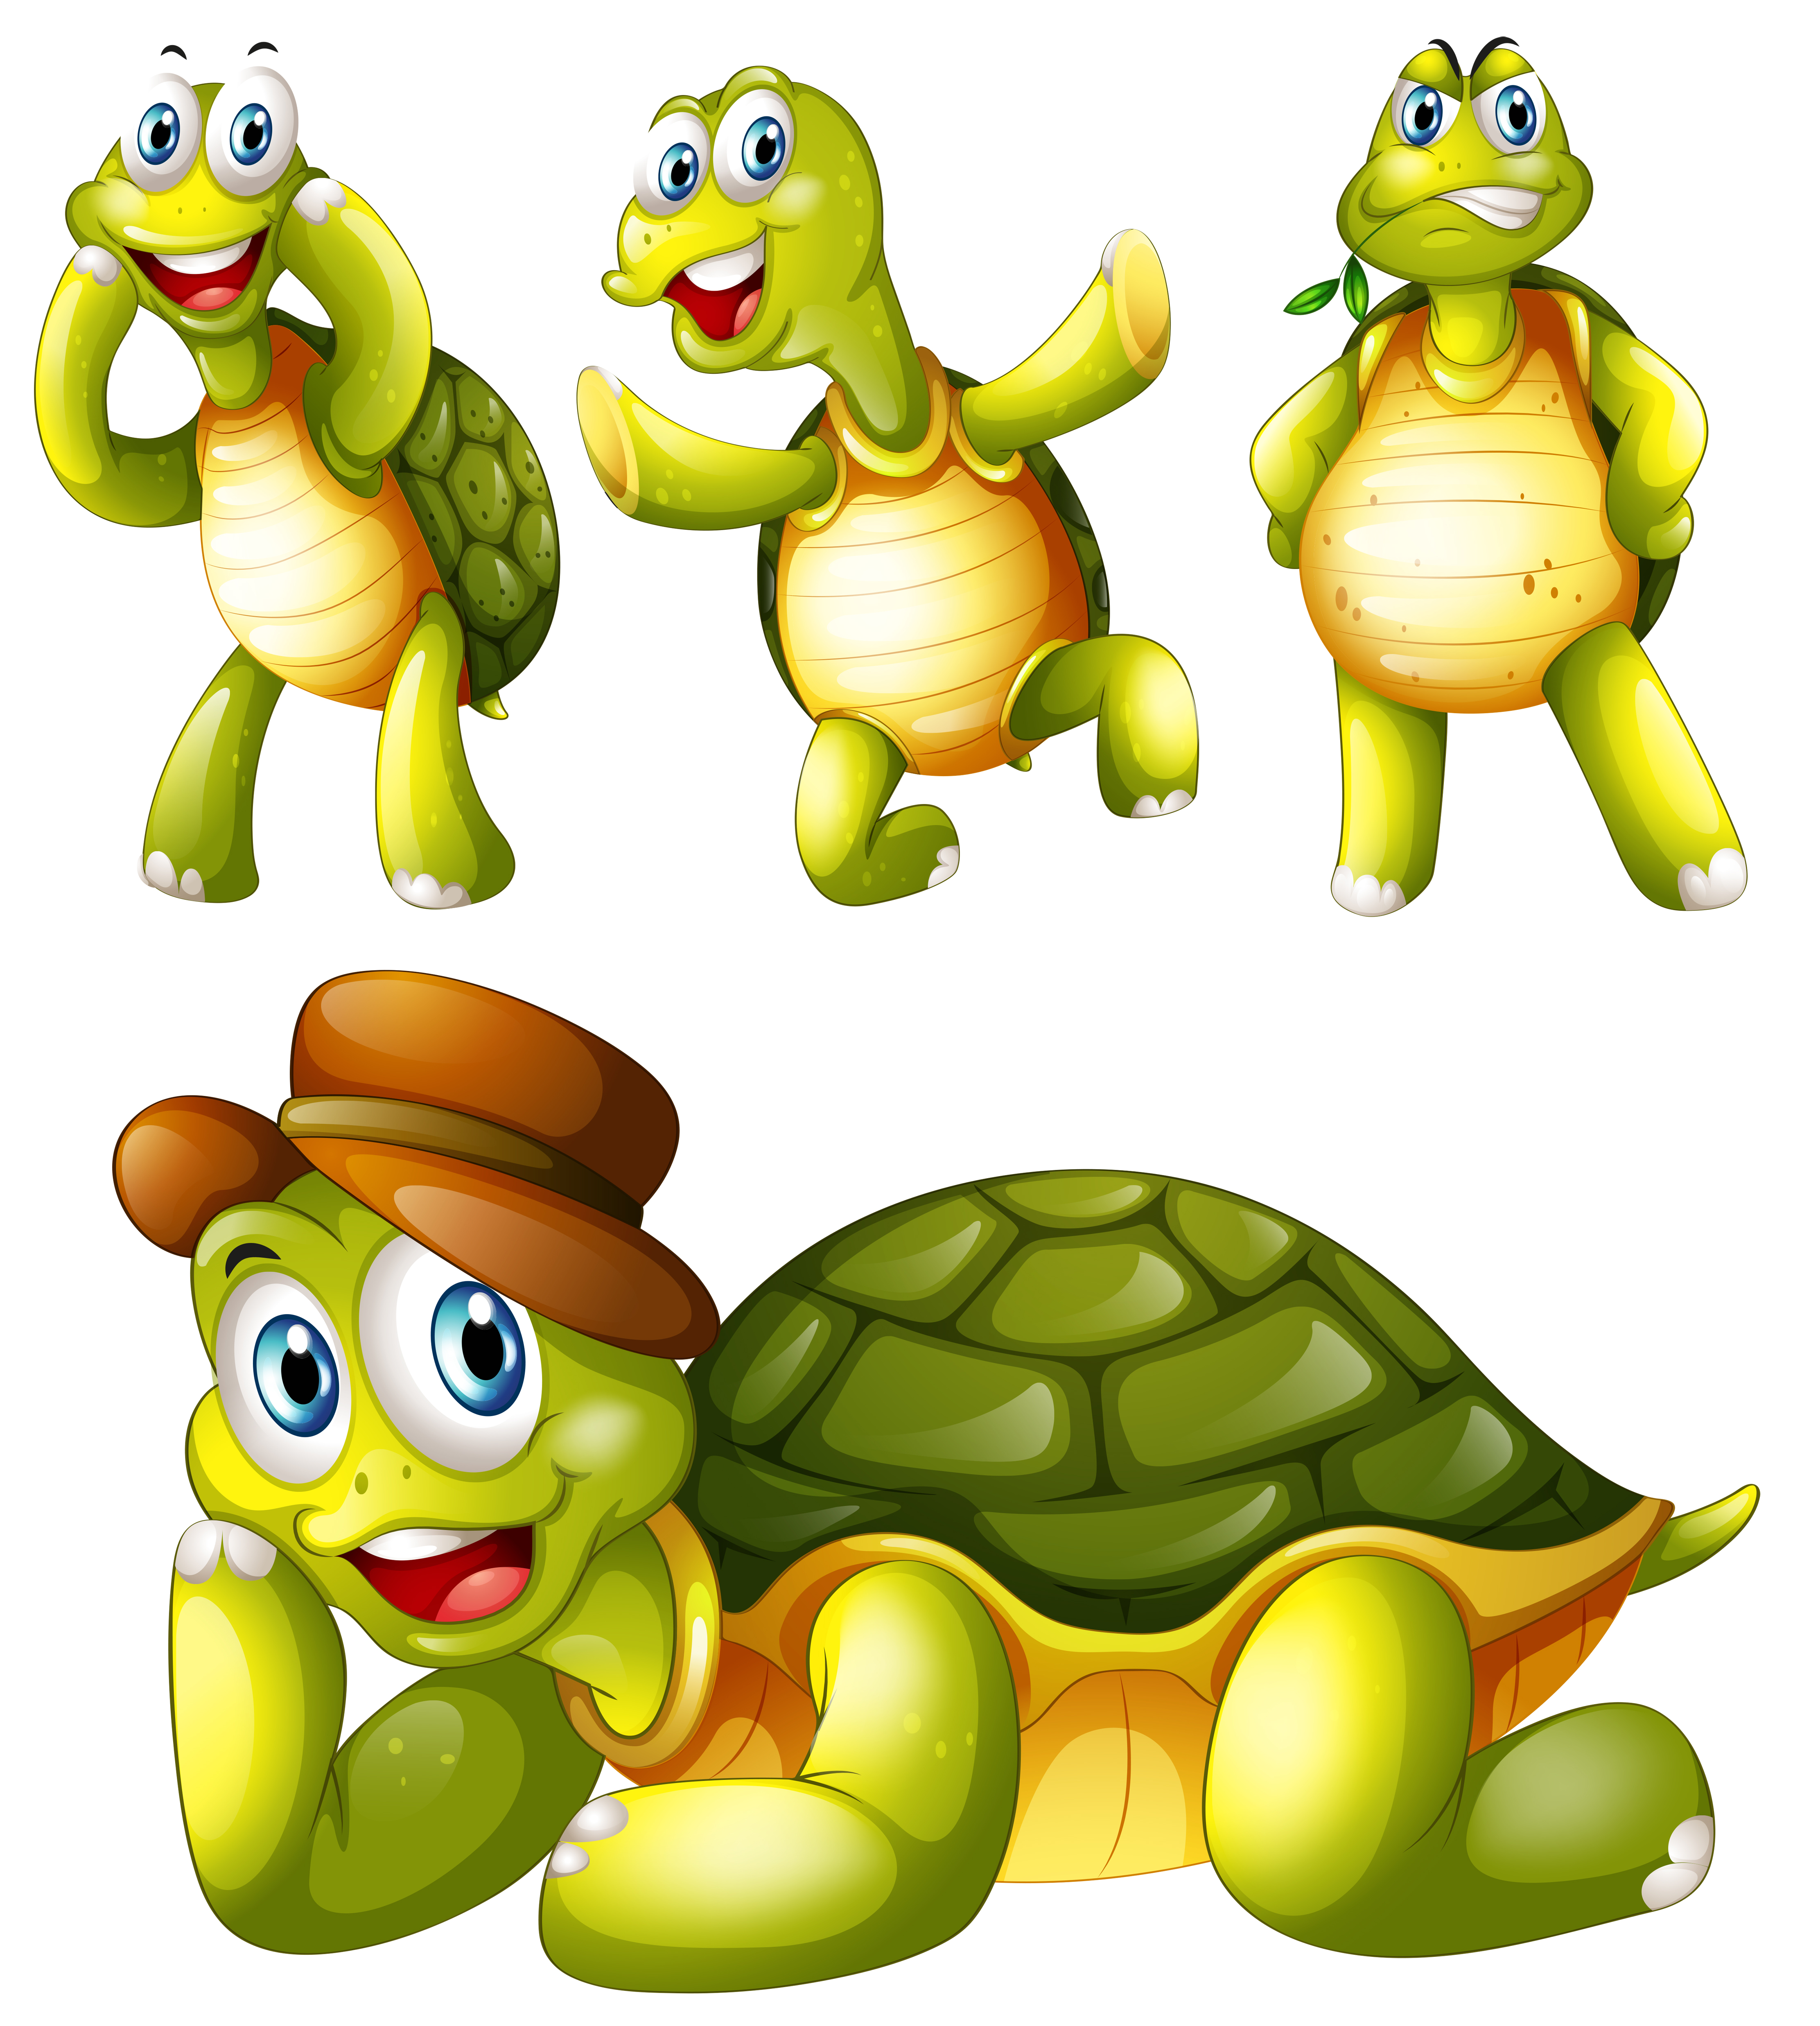 Four playful turtles Download Free Vectors, Clipart